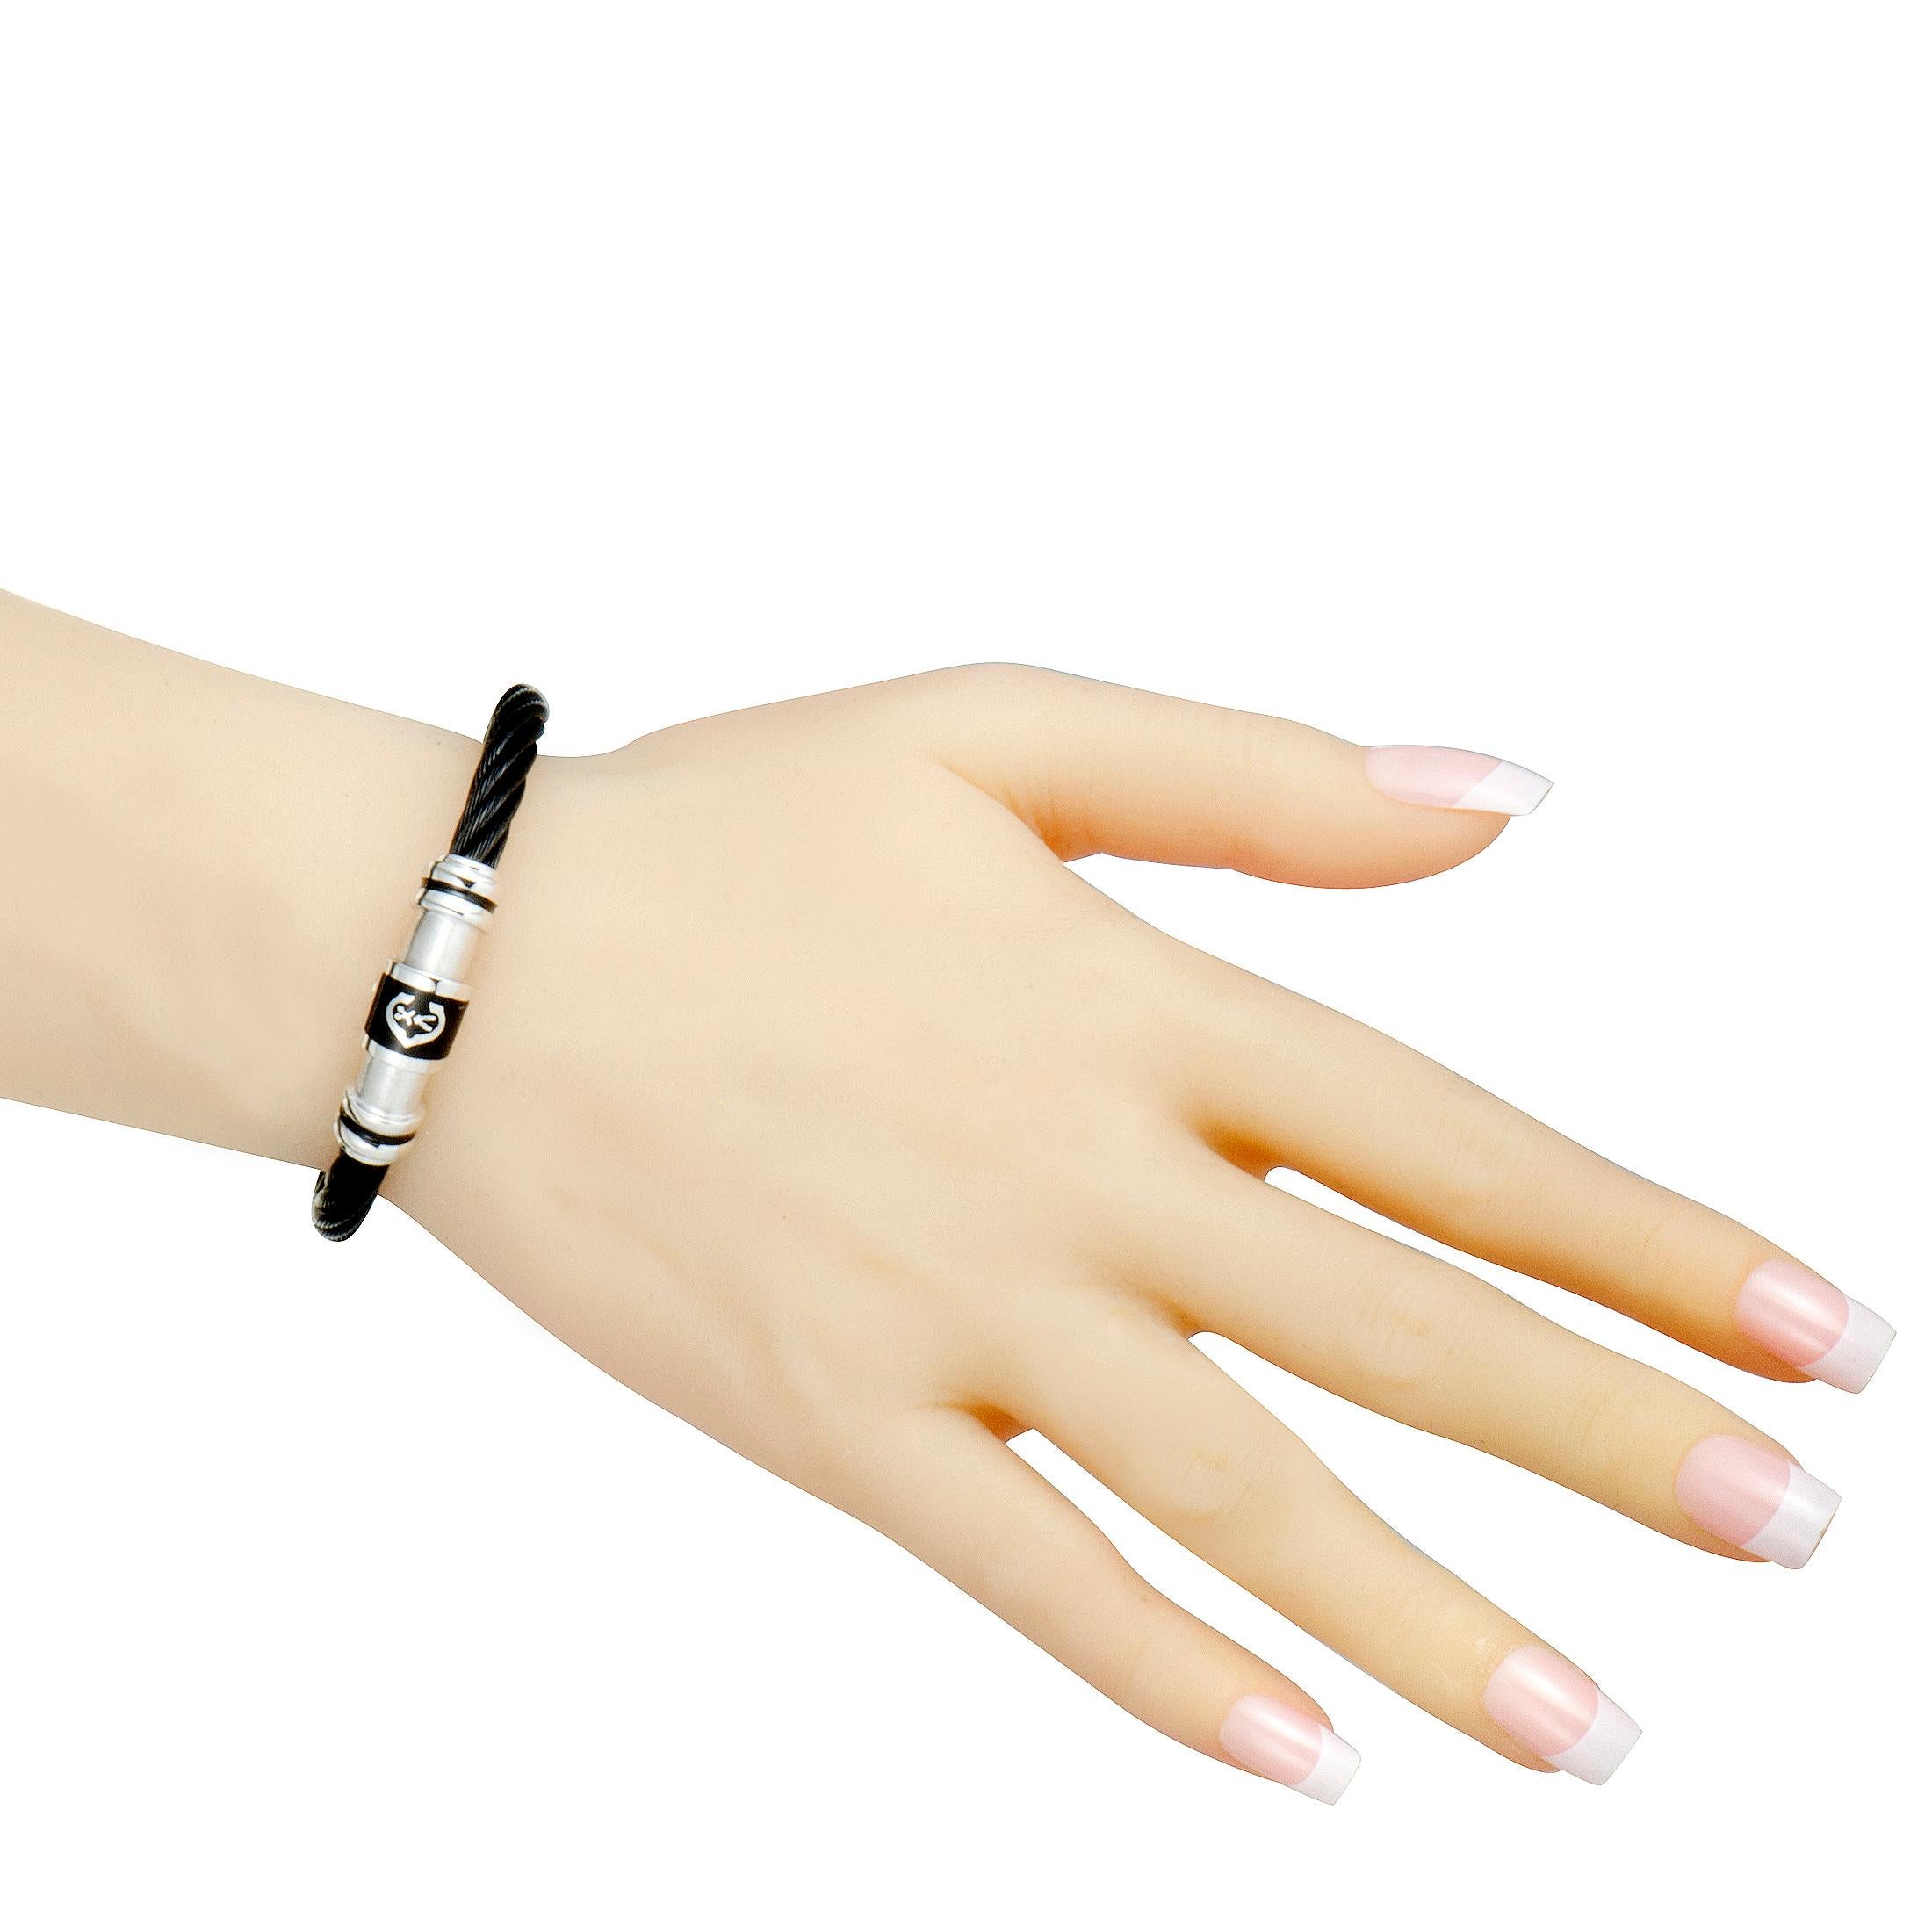 Accentuate your outfits in an intriguingly fashionable manner with this extraordinarily designed bracelet that is presented by Charriol. The bracelet is made of partially black PVD-coated stainless steel and it weighs 33.7 grams.